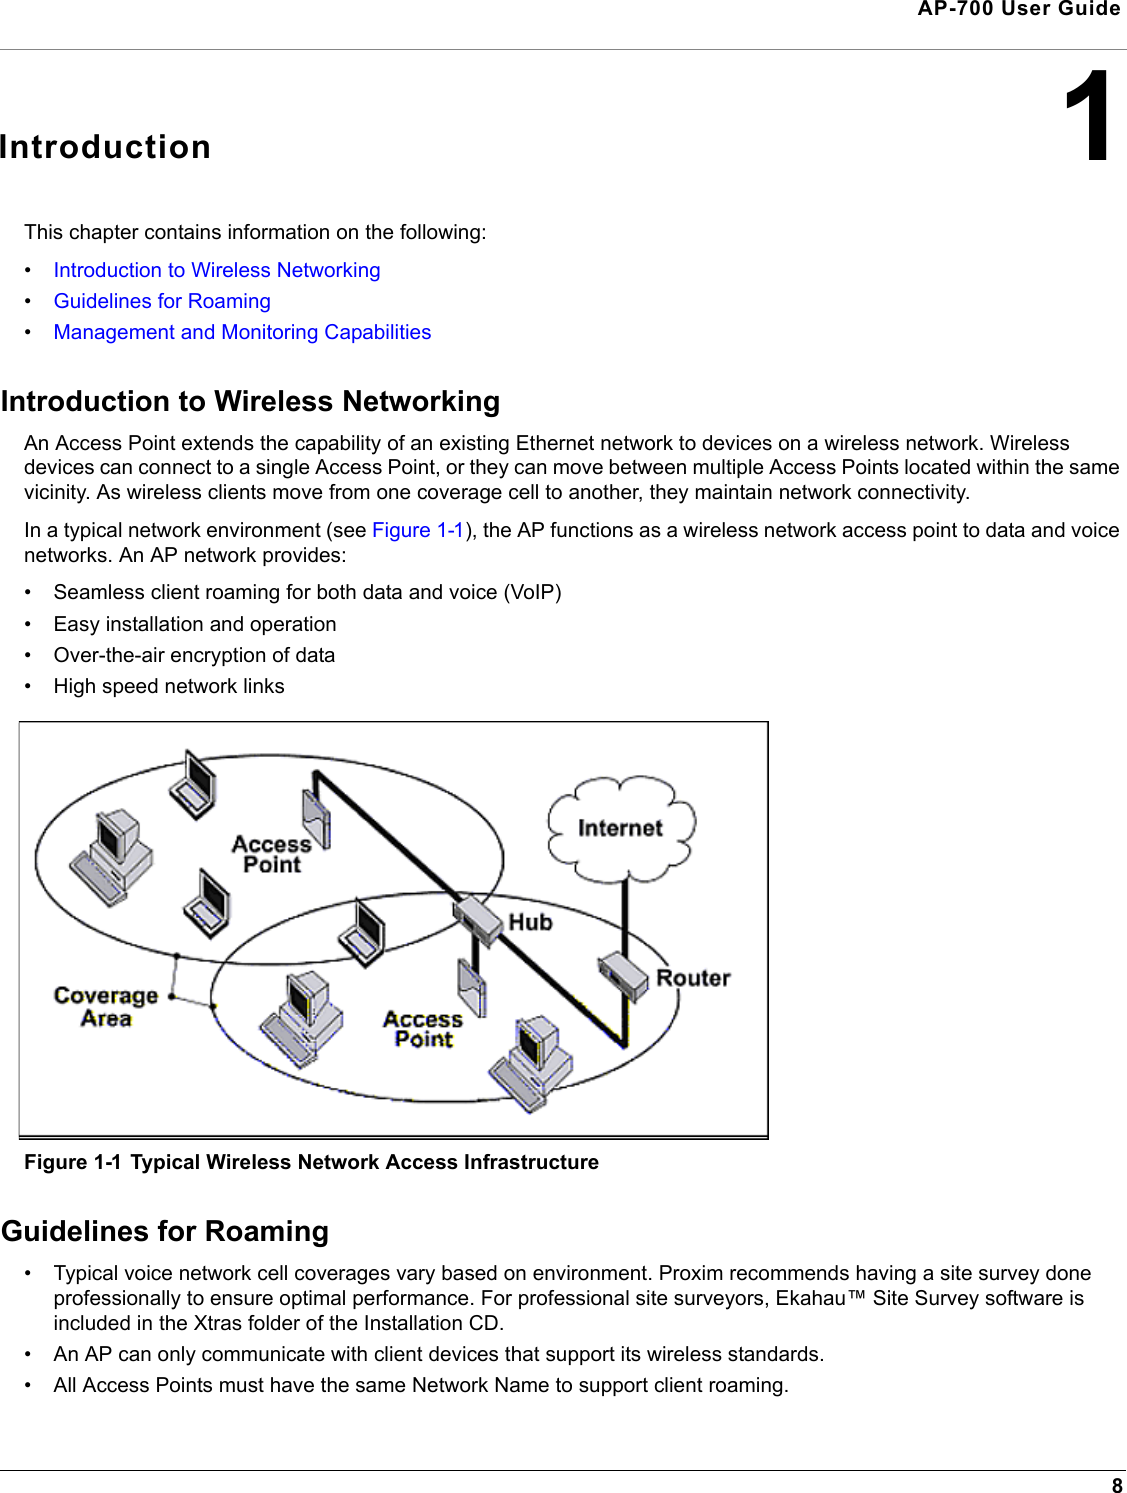 8AP-700 User Guide1IntroductionThis chapter contains information on the following:•Introduction to Wireless Networking•Guidelines for Roaming•Management and Monitoring Capabilities Introduction to Wireless NetworkingAn Access Point extends the capability of an existing Ethernet network to devices on a wireless network. Wireless devices can connect to a single Access Point, or they can move between multiple Access Points located within the same vicinity. As wireless clients move from one coverage cell to another, they maintain network connectivity.In a typical network environment (see Figure 1-1), the AP functions as a wireless network access point to data and voice networks. An AP network provides:• Seamless client roaming for both data and voice (VoIP)• Easy installation and operation• Over-the-air encryption of data• High speed network linksFigure 1-1 Typical Wireless Network Access InfrastructureGuidelines for Roaming• Typical voice network cell coverages vary based on environment. Proxim recommends having a site survey done professionally to ensure optimal performance. For professional site surveyors, Ekahau™ Site Survey software is included in the Xtras folder of the Installation CD.• An AP can only communicate with client devices that support its wireless standards.• All Access Points must have the same Network Name to support client roaming.